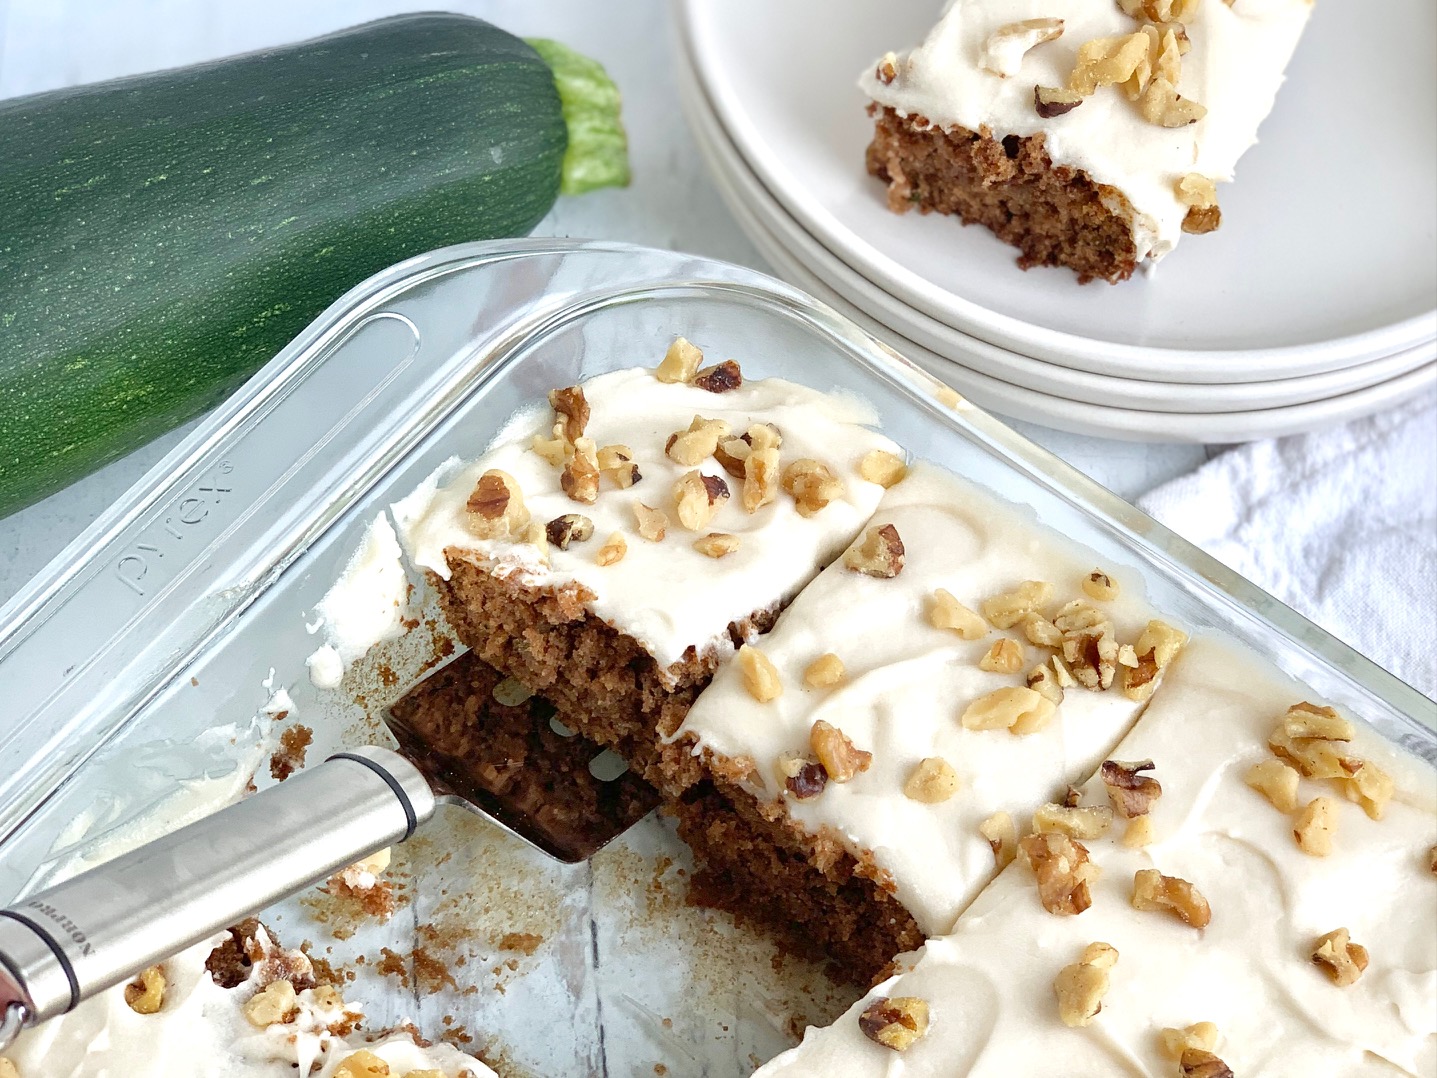 A glass baking pan filled with a golden colored cake and cream cheese frosting on top with scattered chopped walnuts next to a whole zucchini and white serving plates.